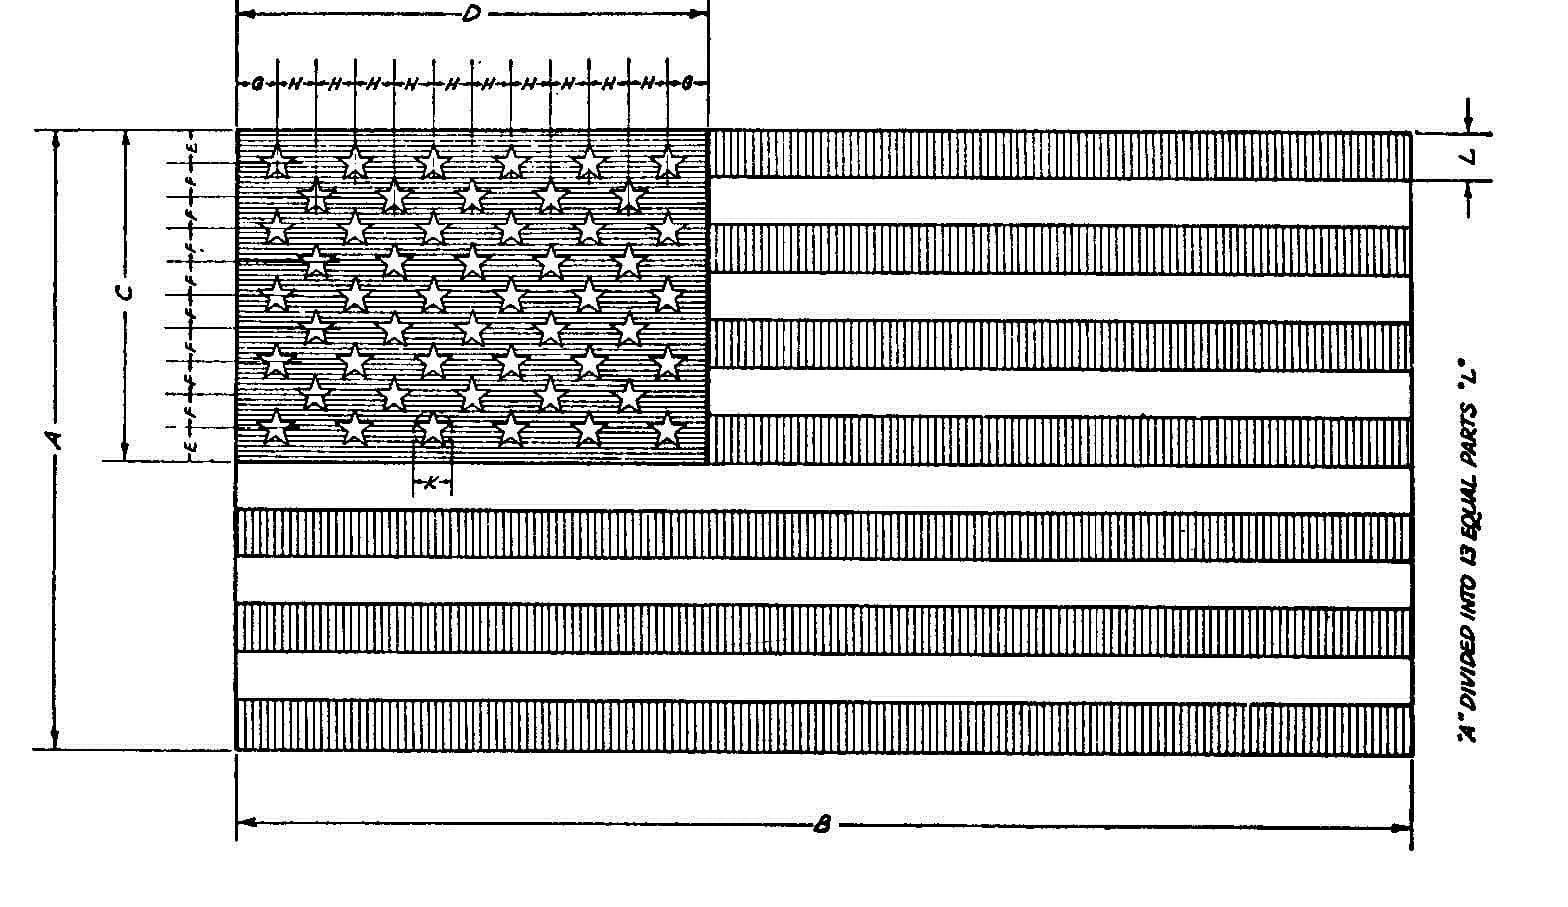 Official US Flag dimensions from the US flag code